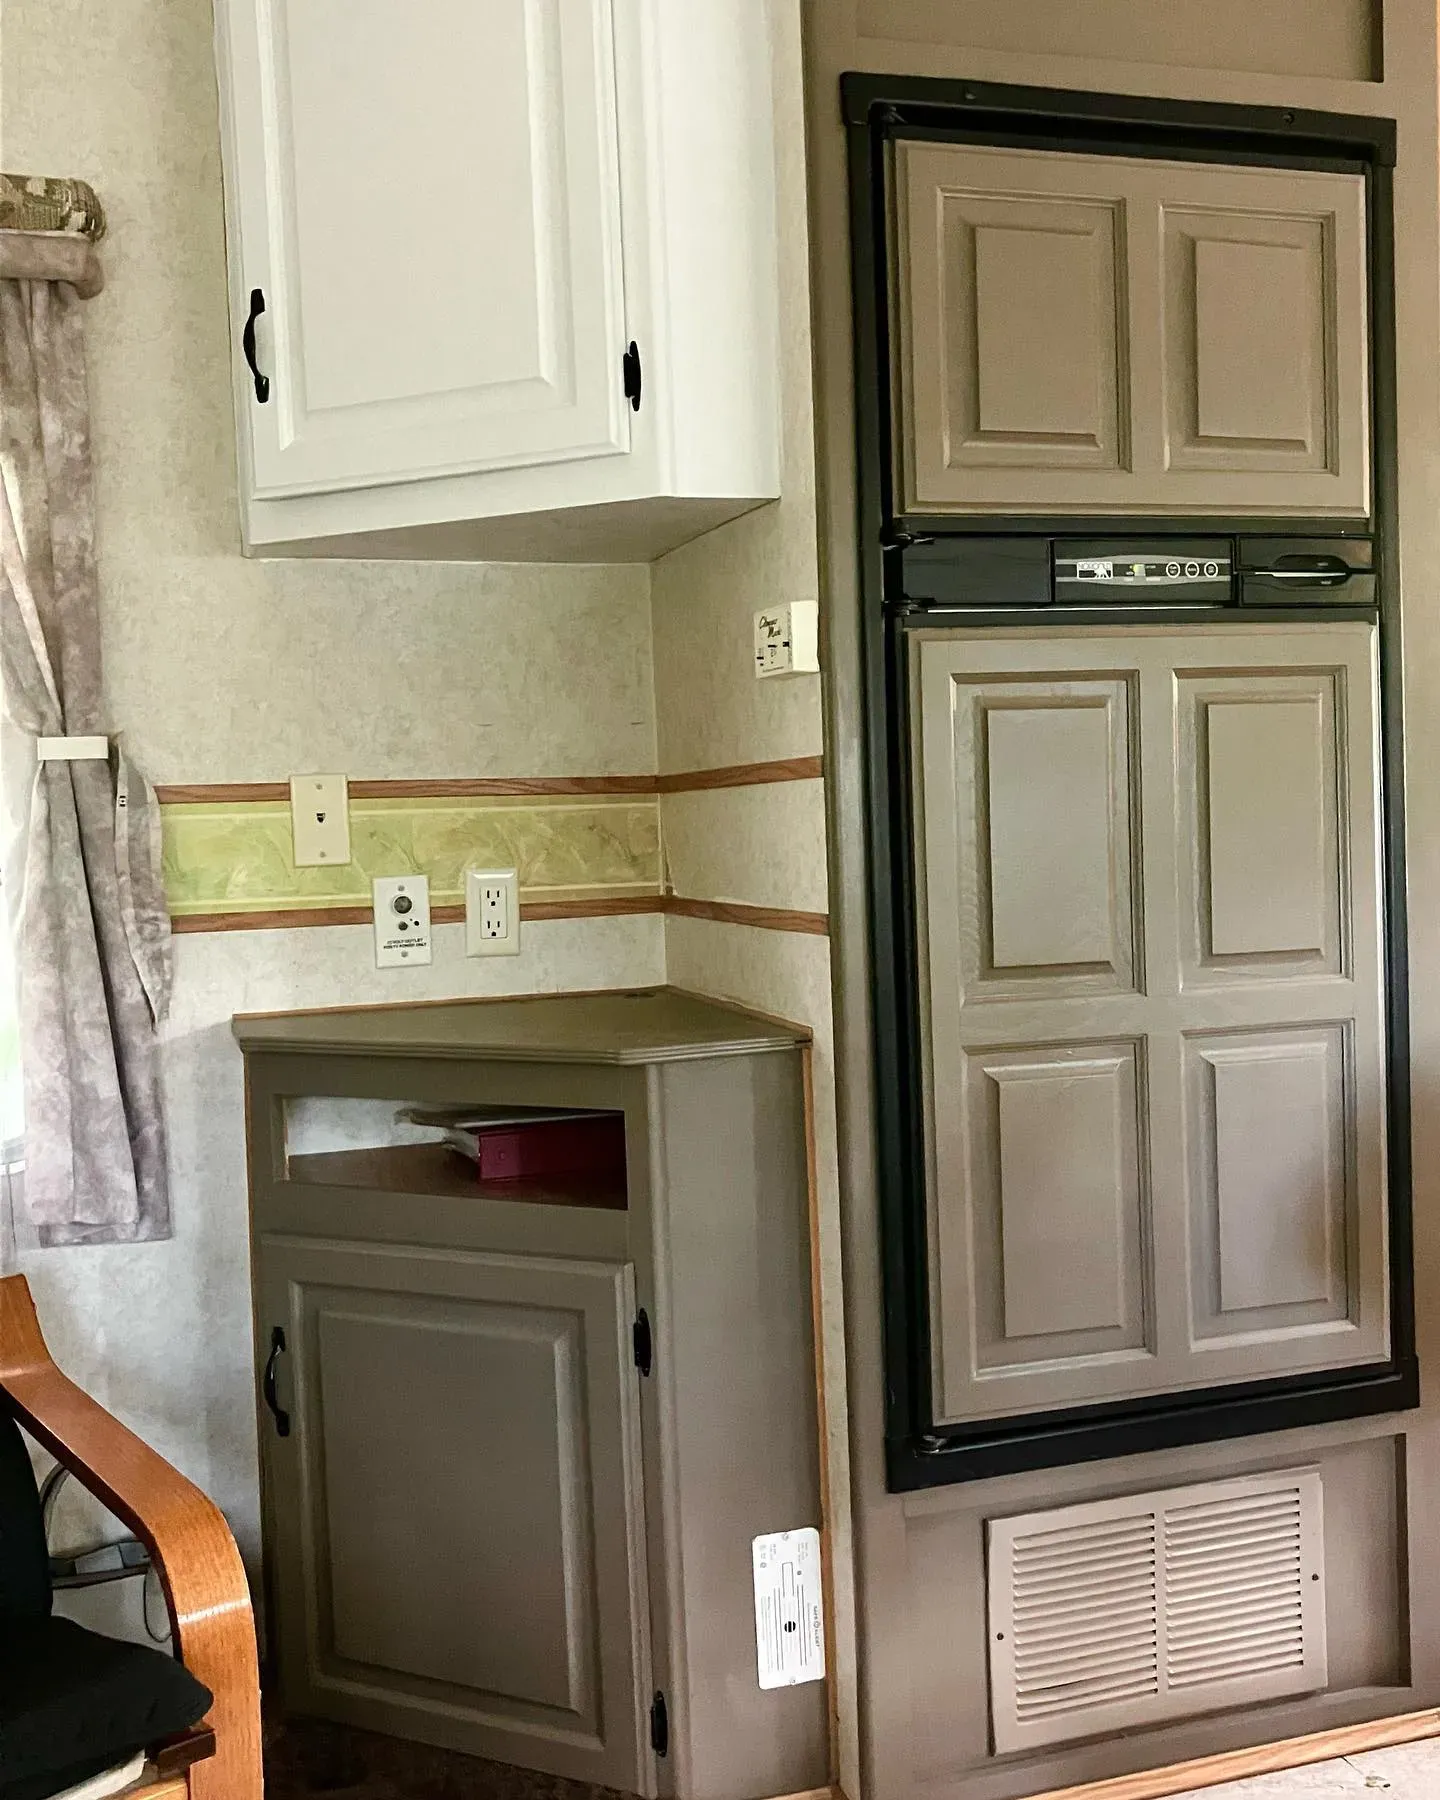 Benjamin Moore Fairview Taupe kitchen cabinets color